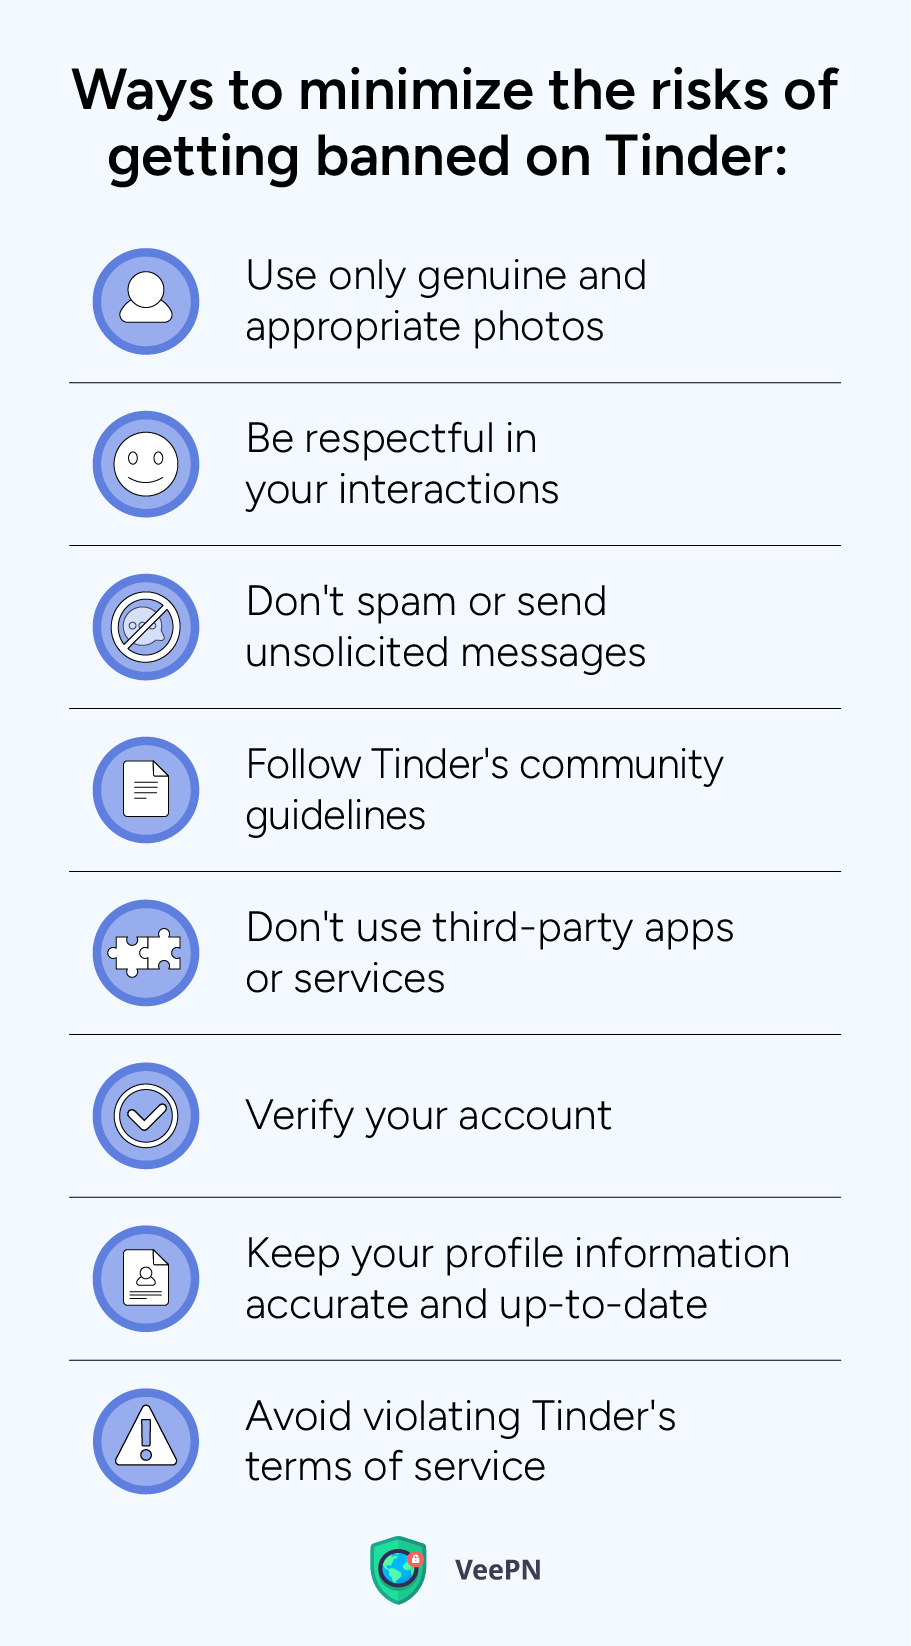 Ways to minimize the risks of getting banned on Tinder